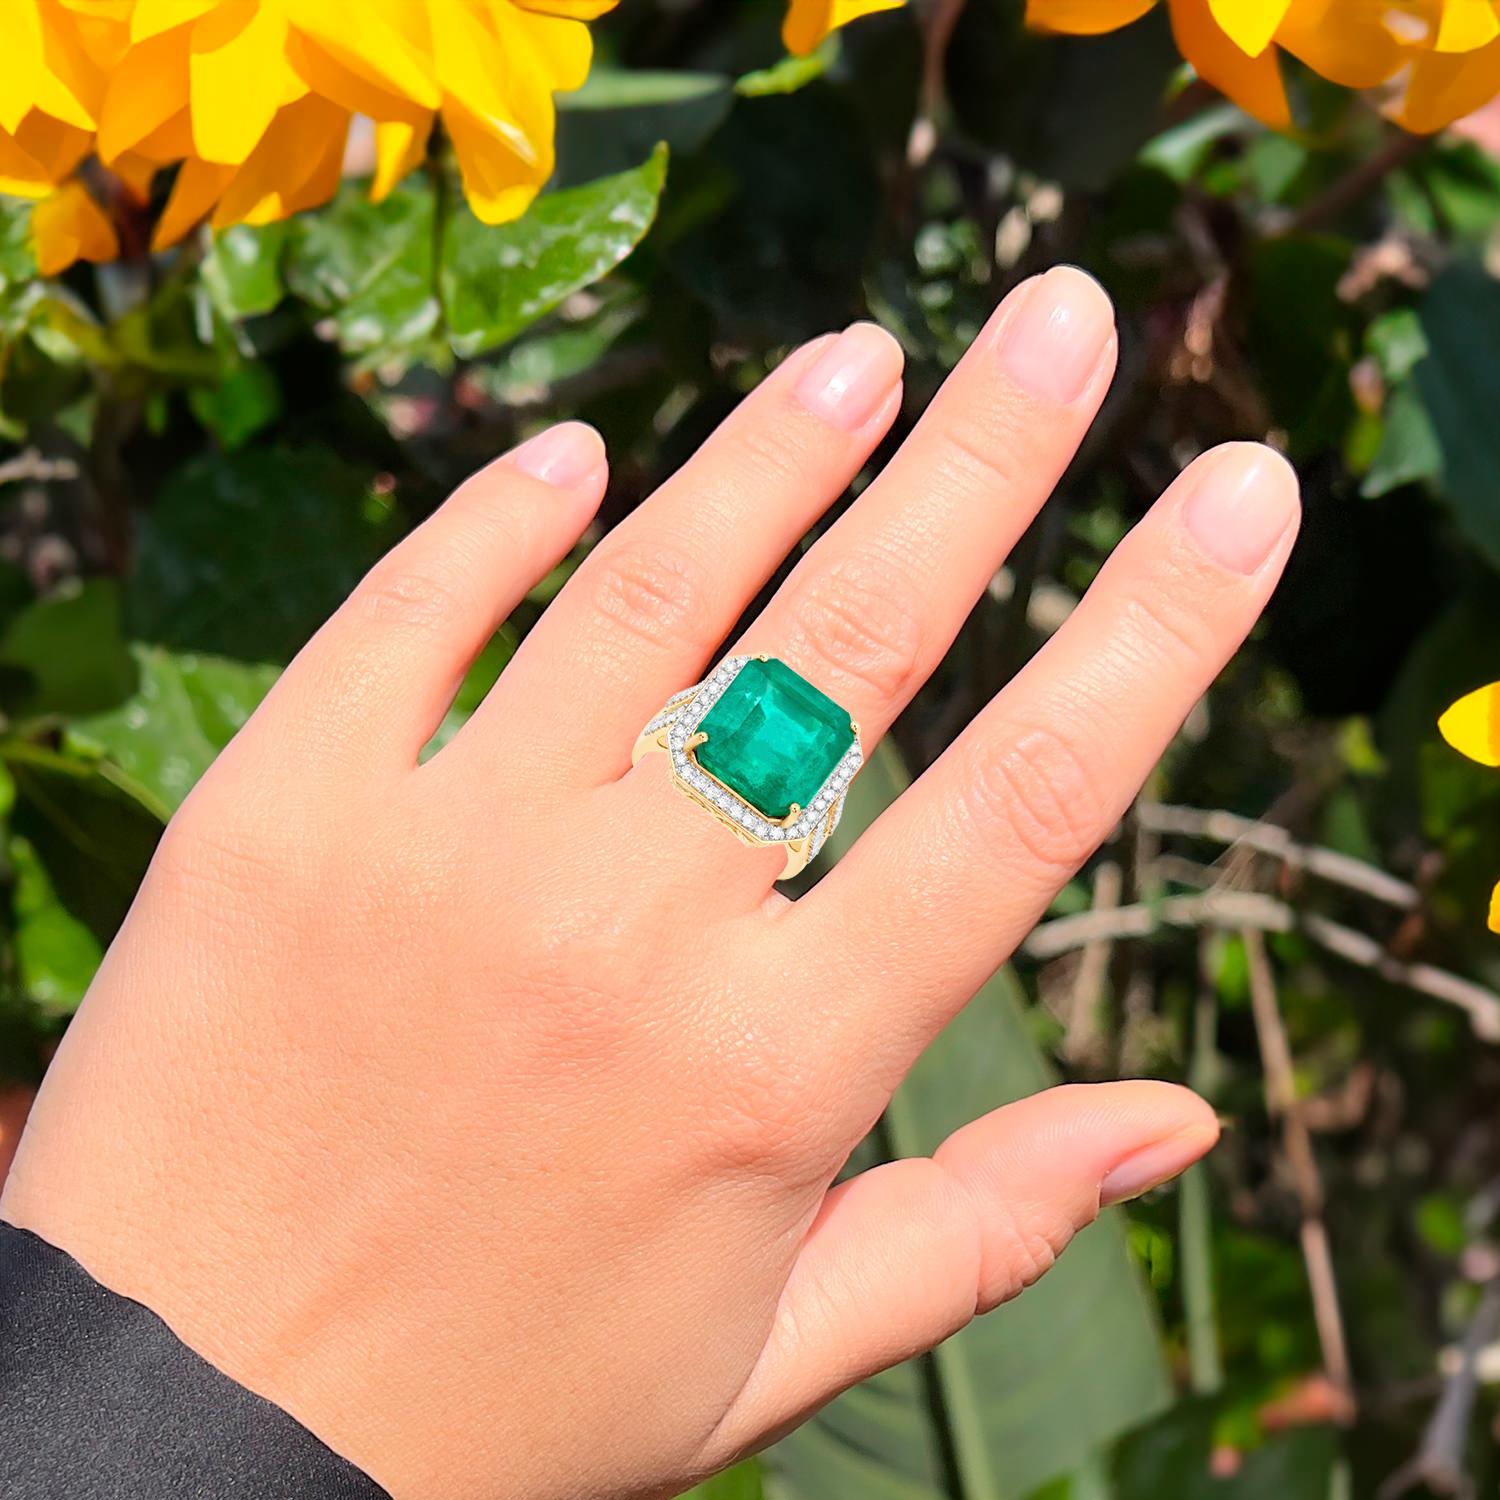 IGI Certified Zambian Emerald Ring With Diamonds 13.06 Carats 14K Yellow Gold In Excellent Condition For Sale In Laguna Niguel, CA